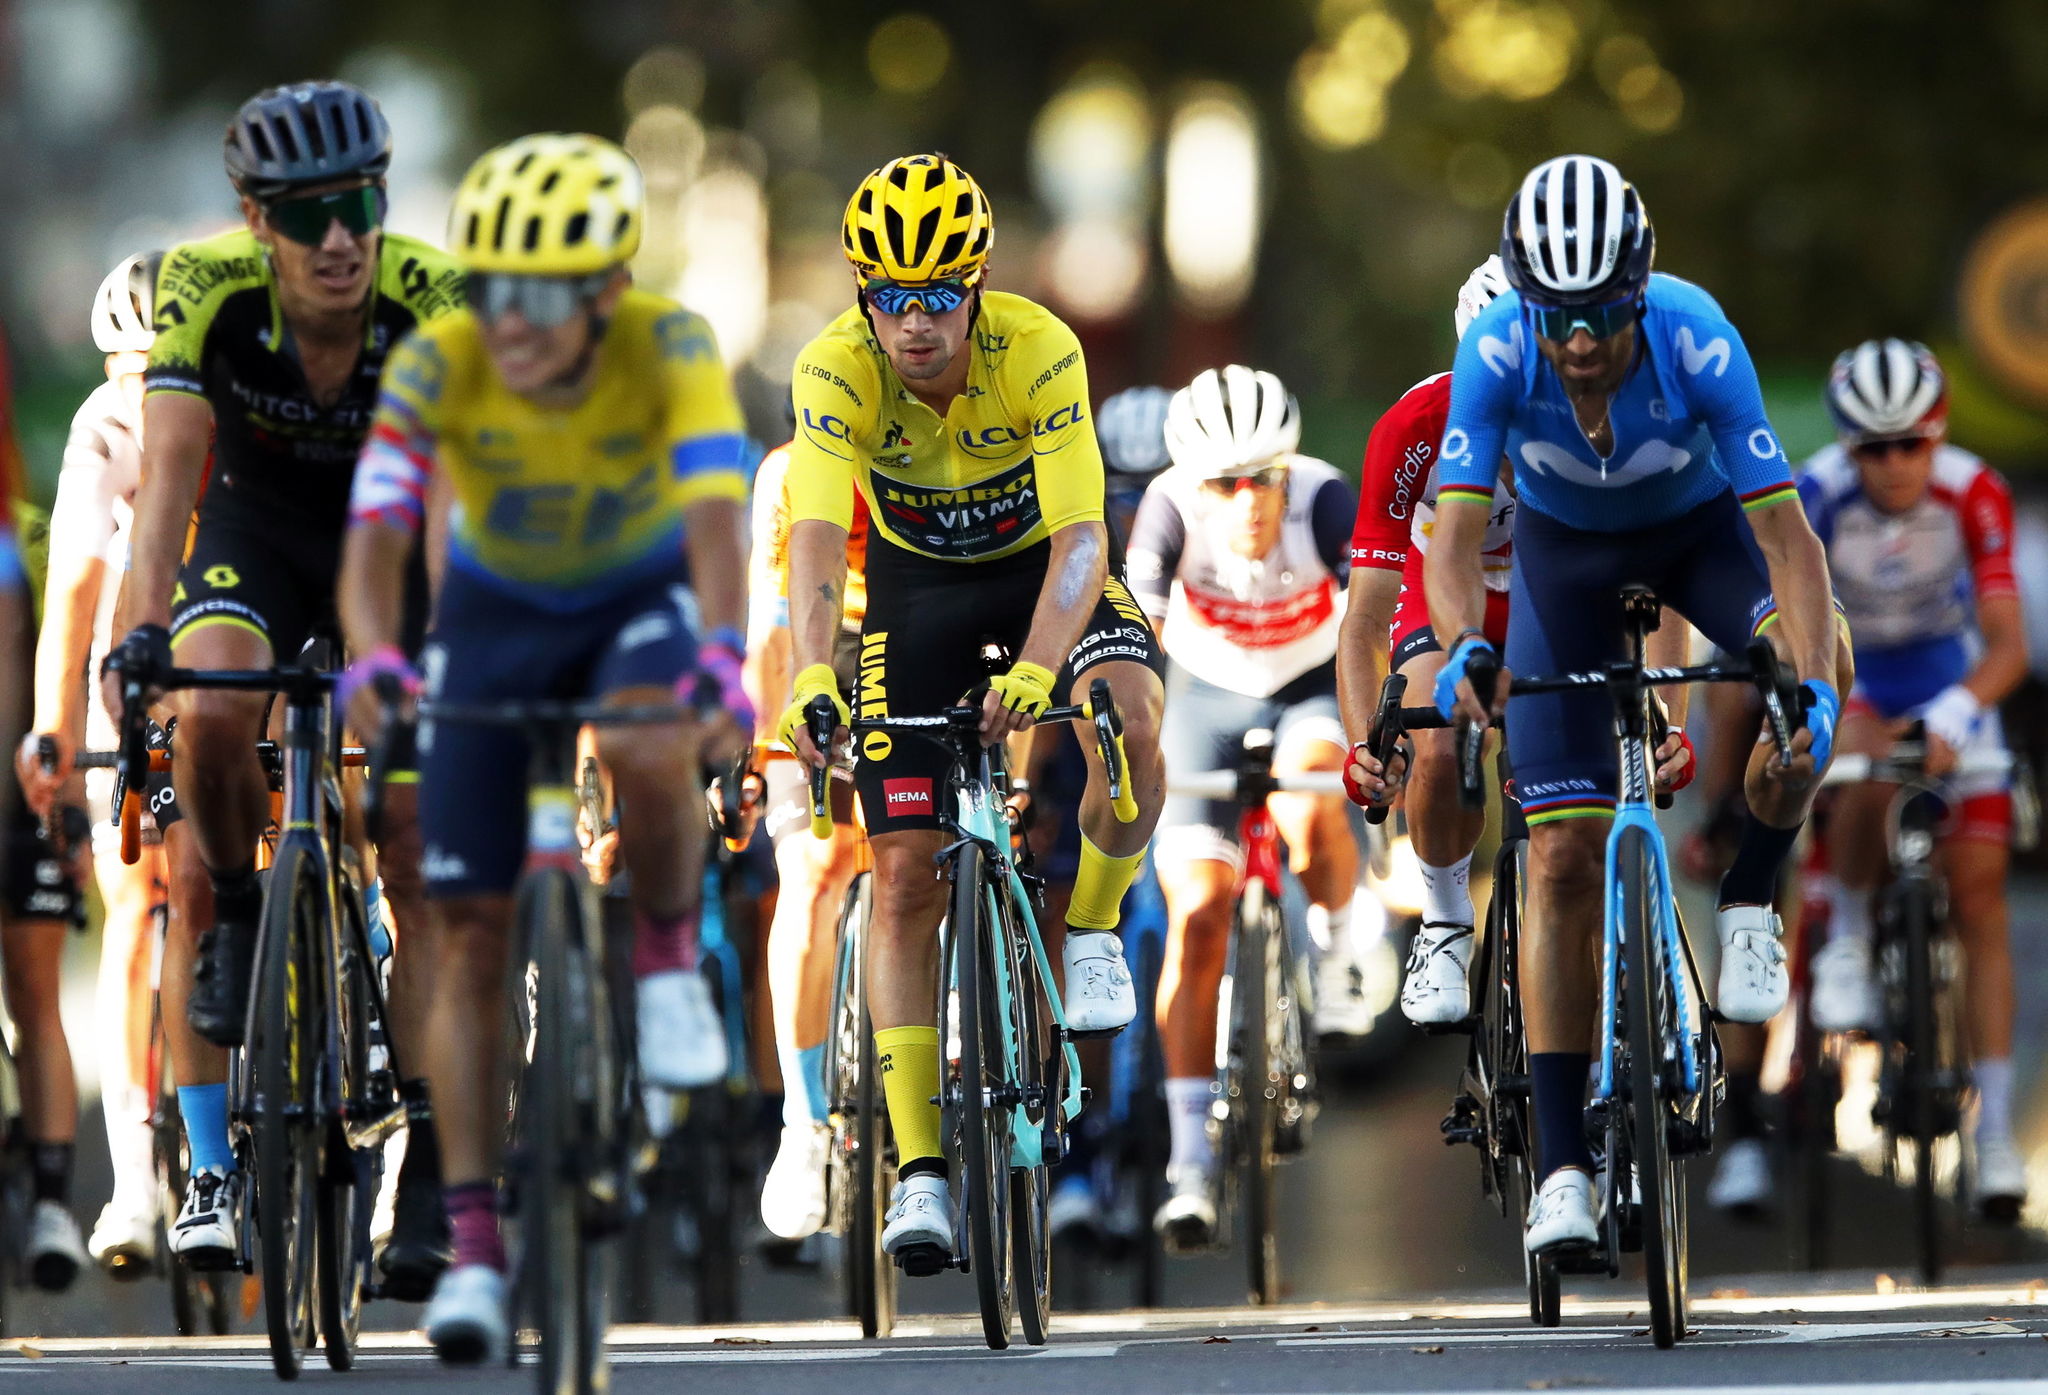 Lyon (France), 12/09/2020.- Slovenian rider Primoz lt;HIT gt;Roglic lt;/HIT gt; (C) wearing the overall leader's yellow jersey crosses the finish line of the 14th stage of the Tour de France over 194km from Clermont-Ferrand to Lyon, France, 12 September 2020. (Ciclismo, Francia, Eslovenia) EFE/EPA/Stephane Mahe / Pool